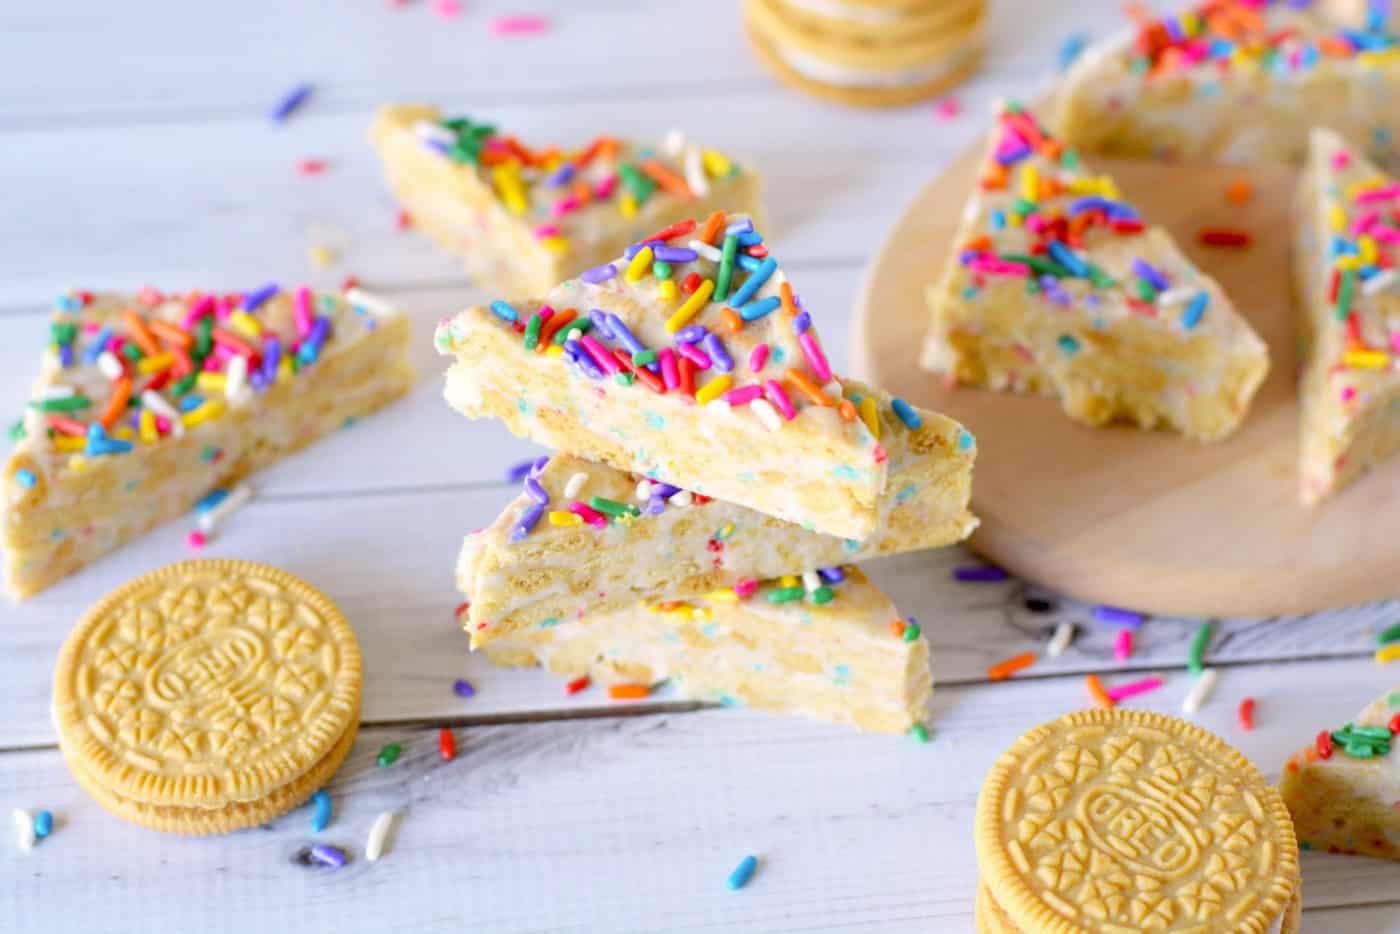 This Oreo dessert features delicious cereal bits that taste just like Fruity Pebbles! Easy to make because it's no bake - your kids will love these.